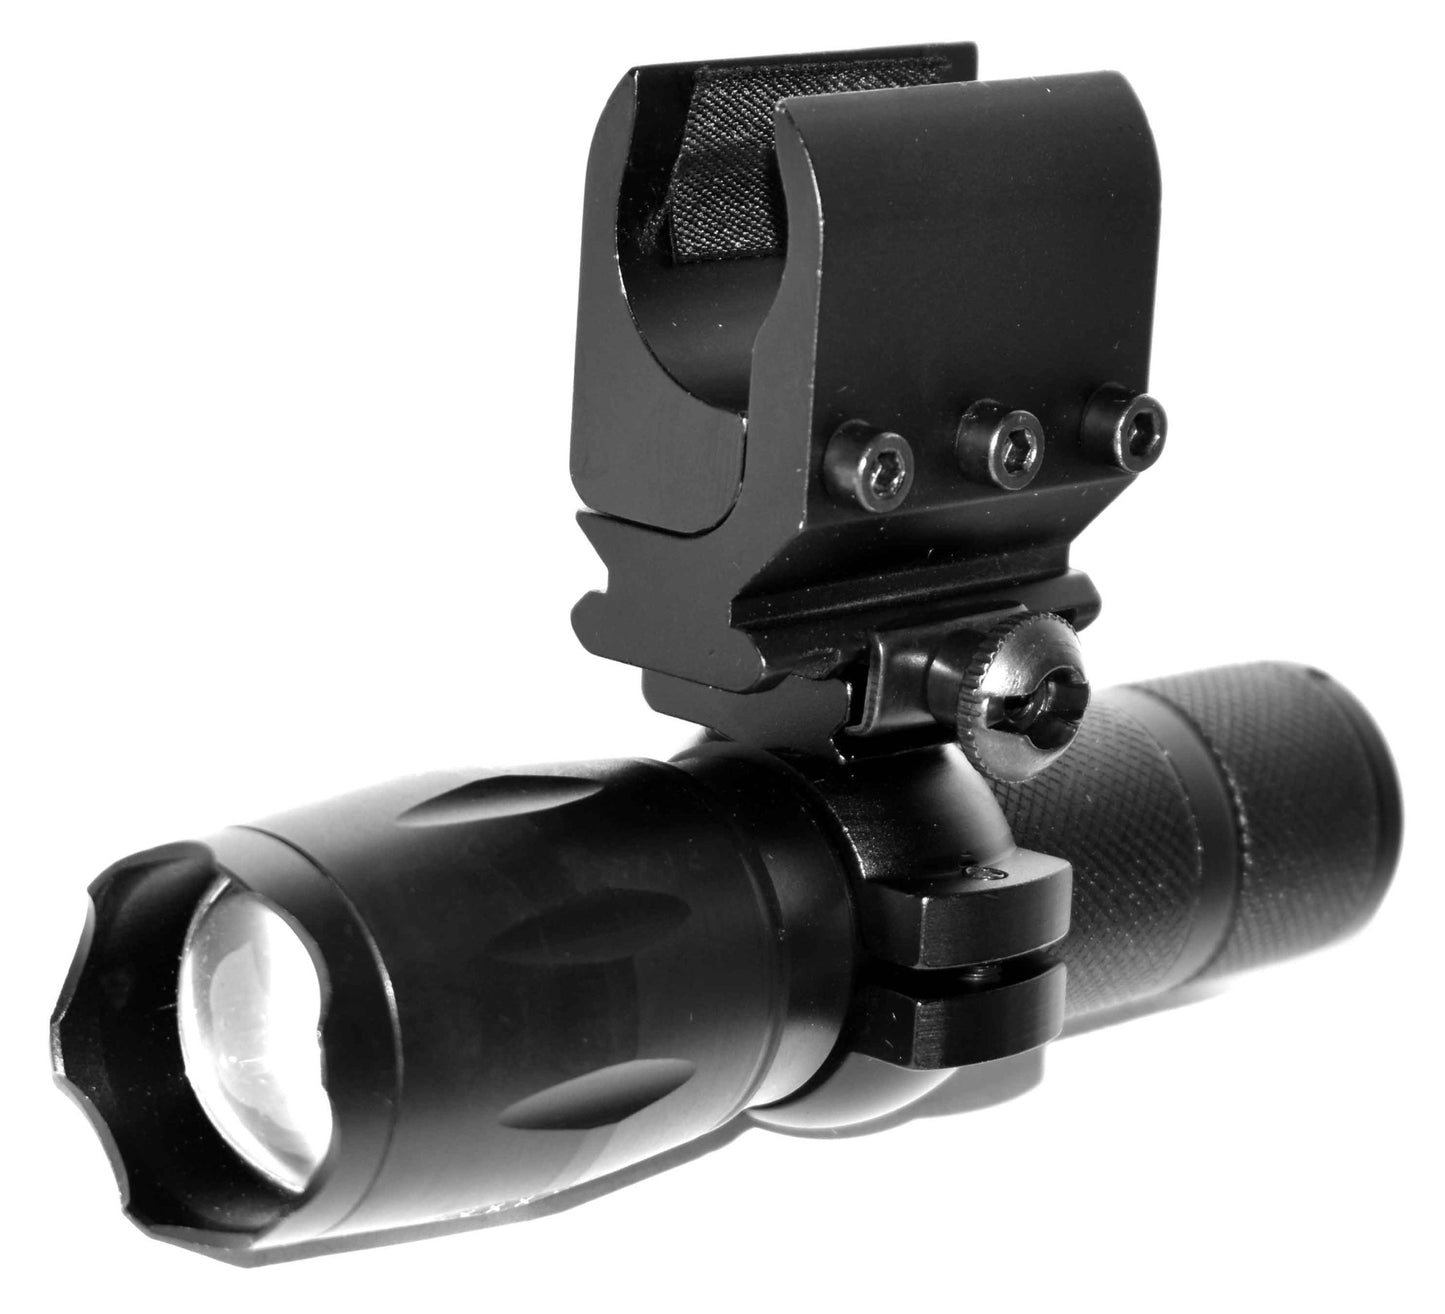 Tactical flashlight 1000 lumen with magazine tube mount compatible with 12 gauge pumps. - TRINITY SUPPLY INC